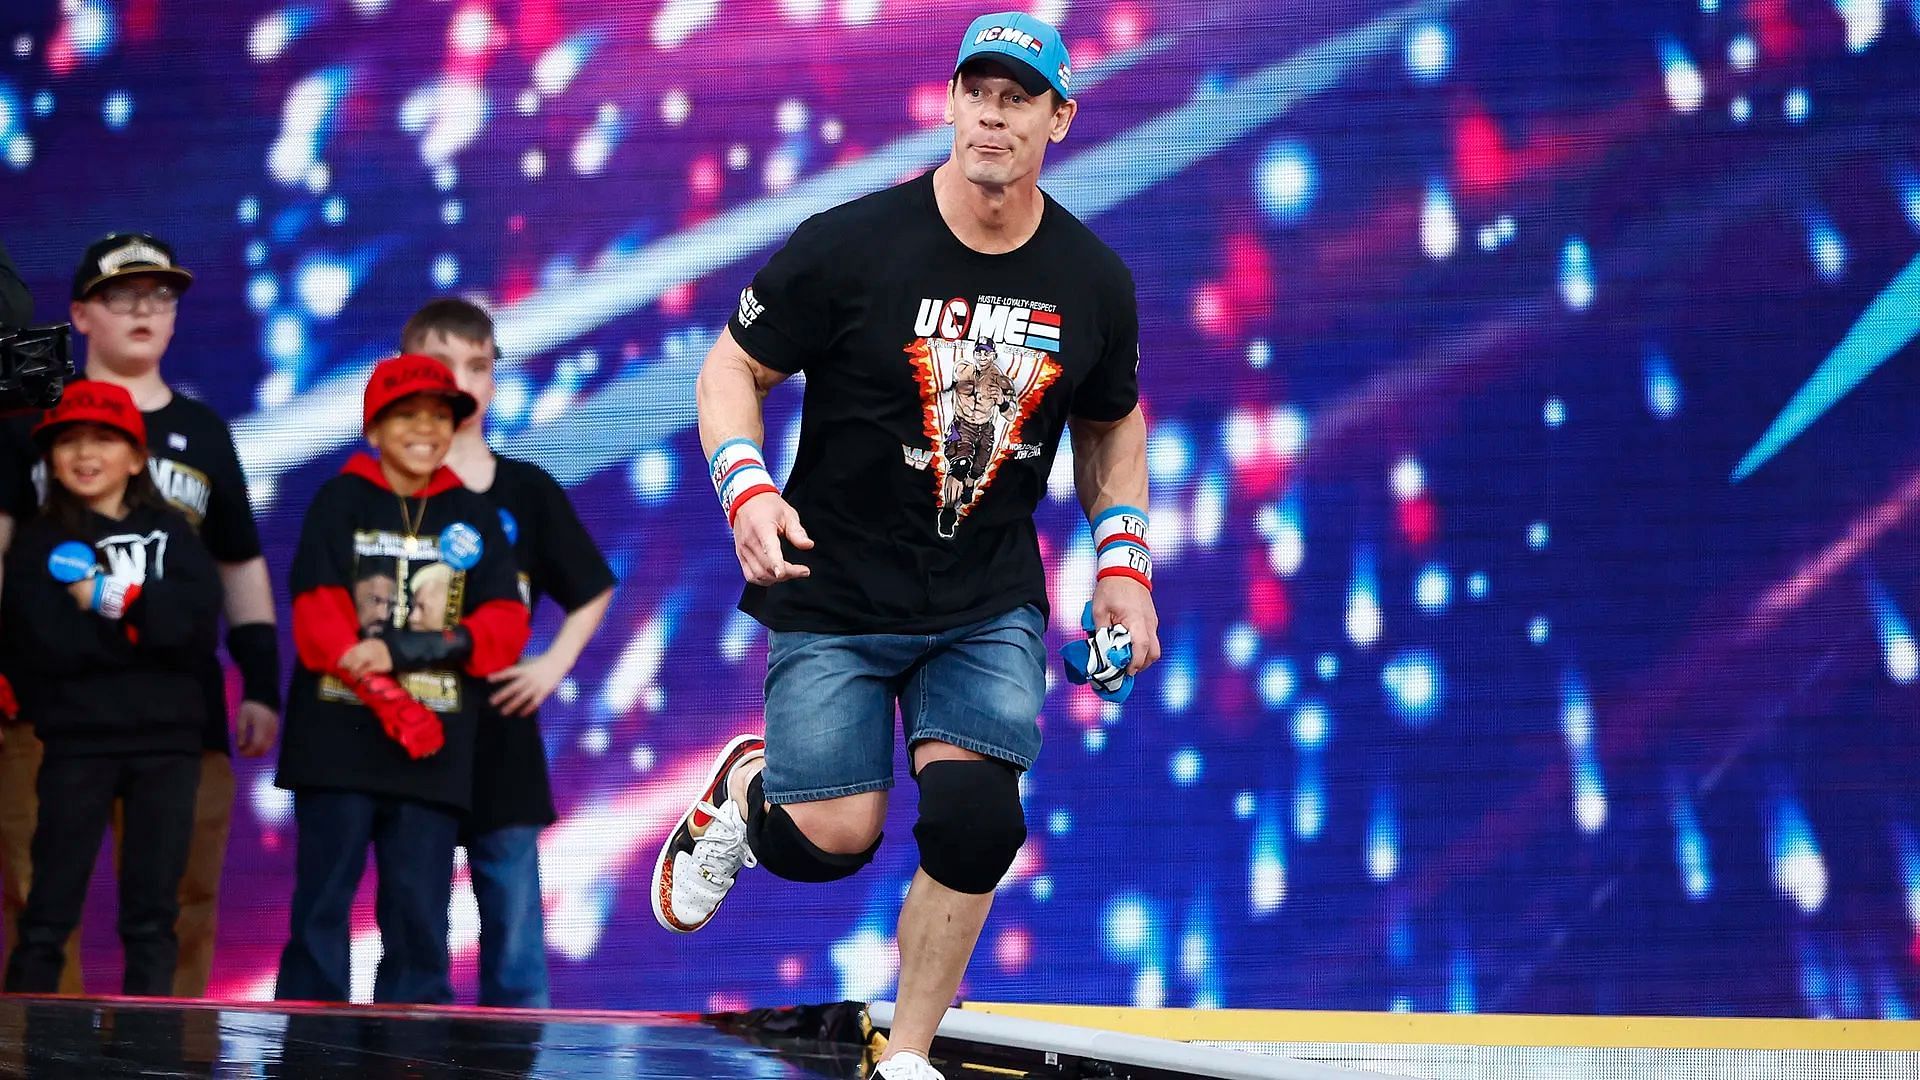 John Cena has cemented his legacy as one of the greats!